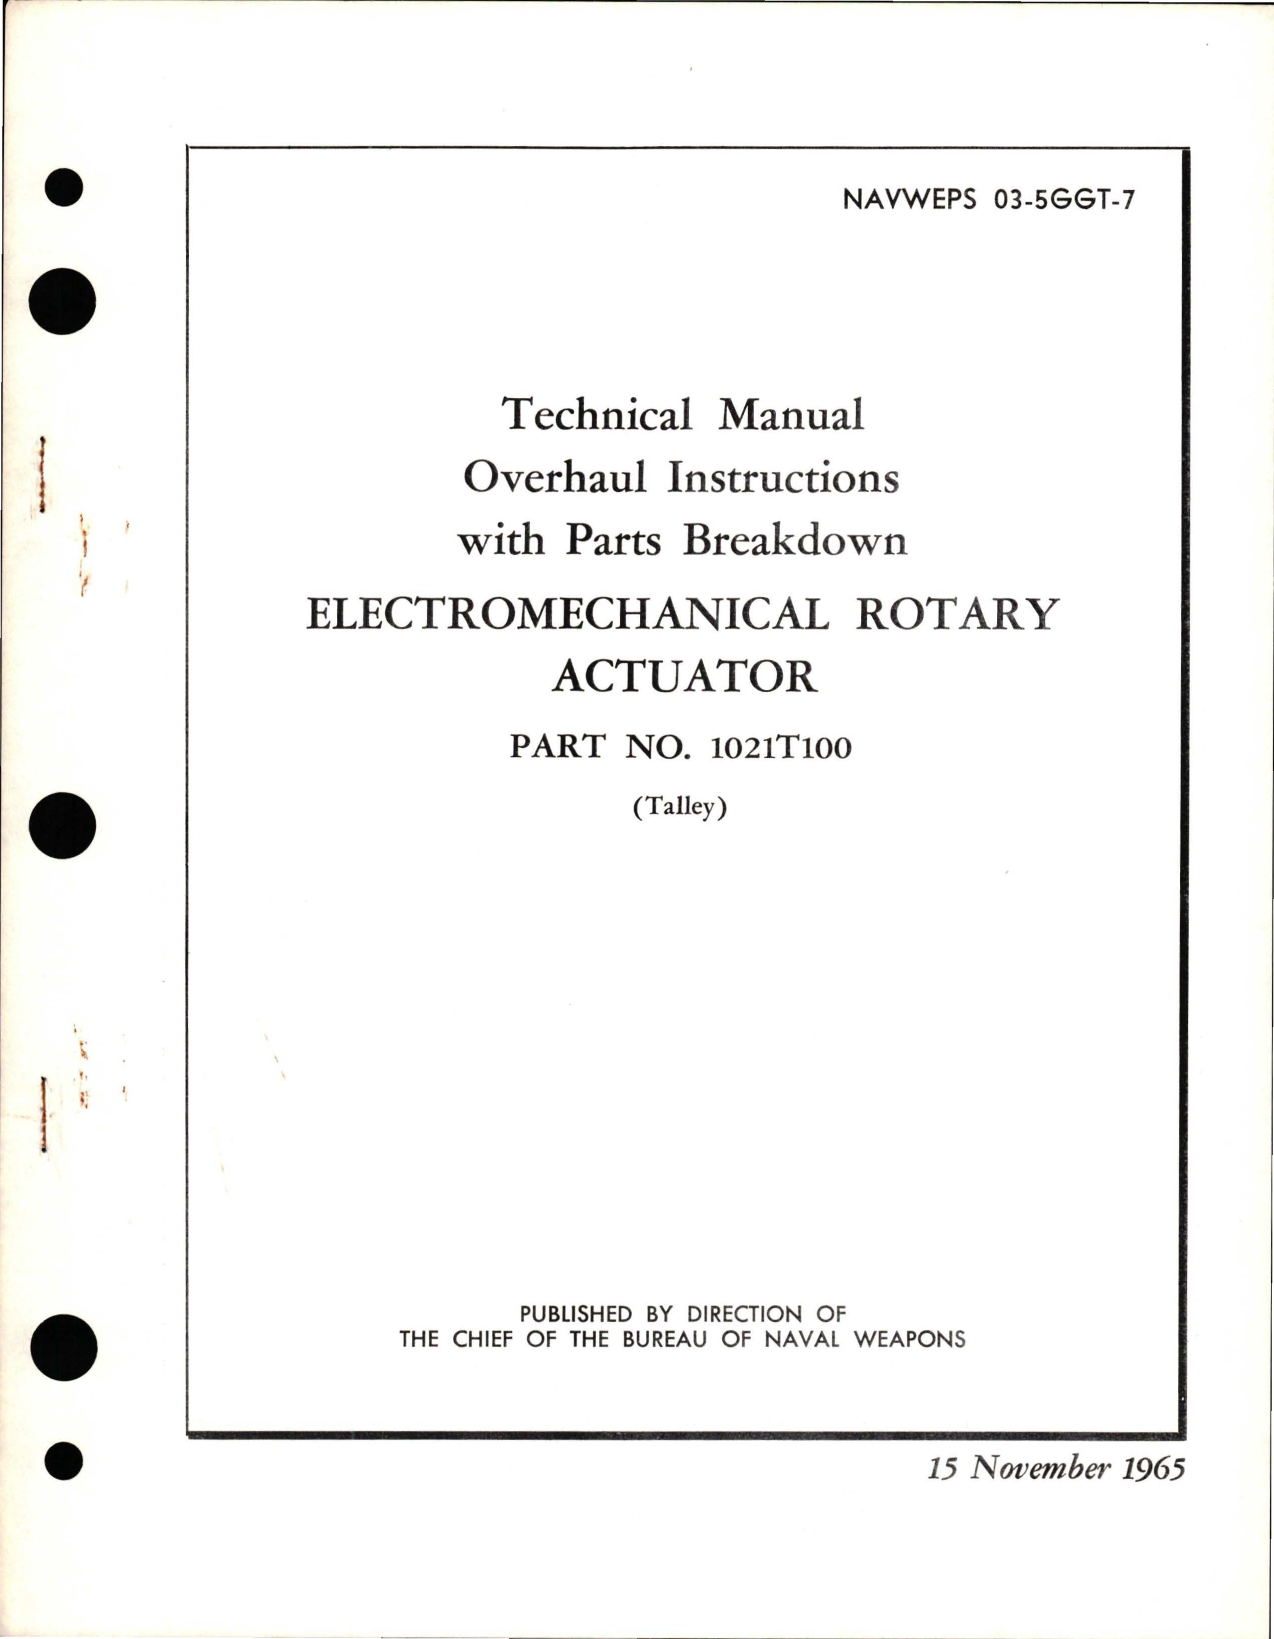 Sample page 1 from AirCorps Library document: Overhaul Instructions with Parts Breakdown for Electromechanical Rotary Actuator - Part 1021T100